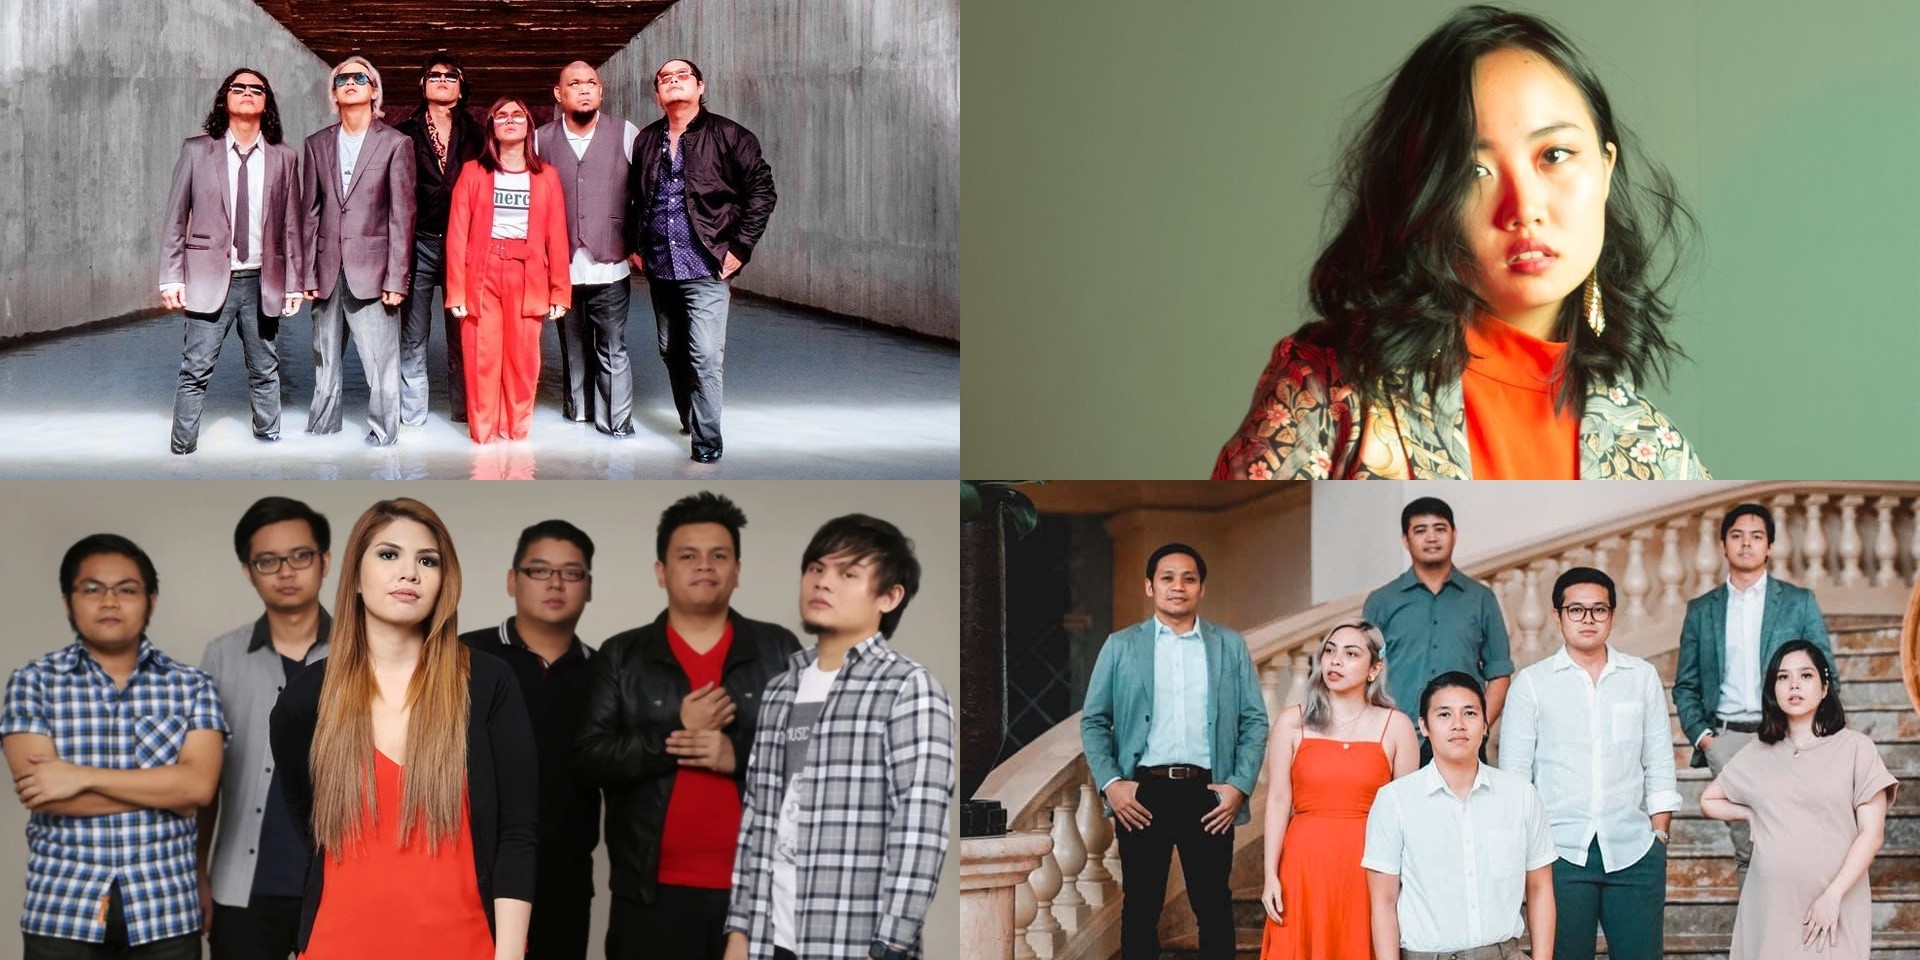 Apartel, Ena Mori, Autotelic, Cheats, and more join All Of the Noise 2019 lineup